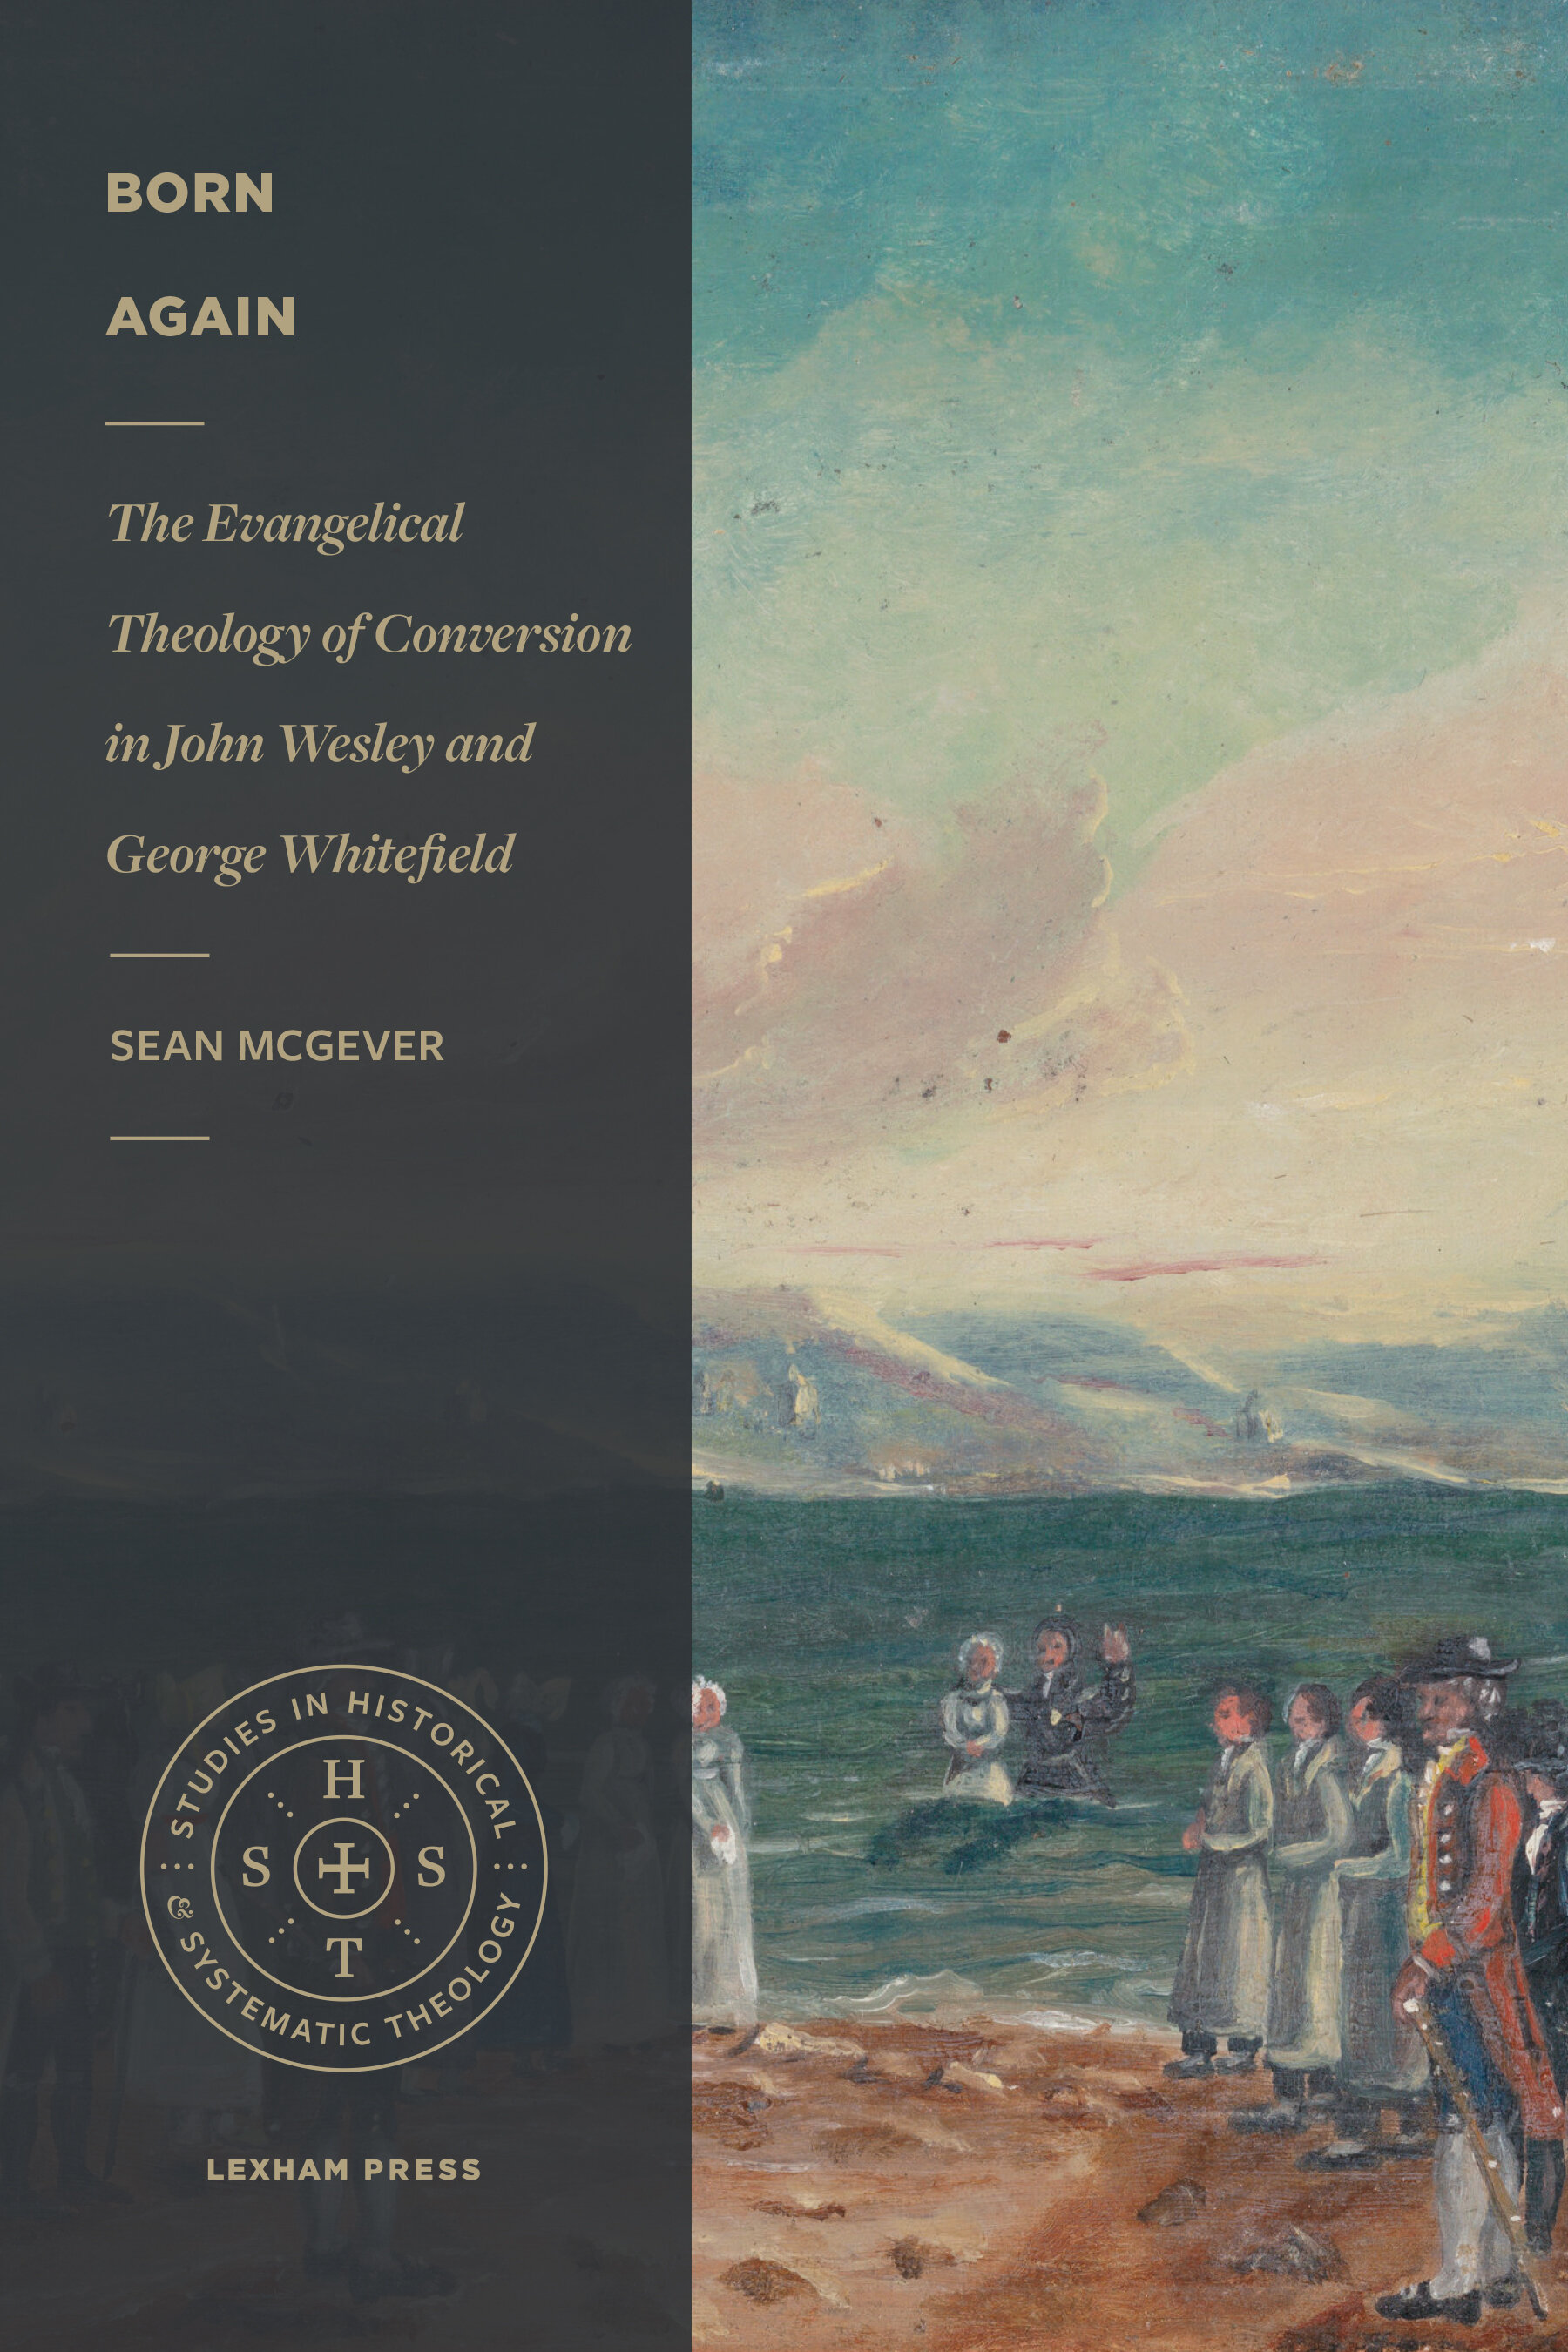 Born Again: The Evangelical Theology of Conversion in John Wesley and George Whitefield